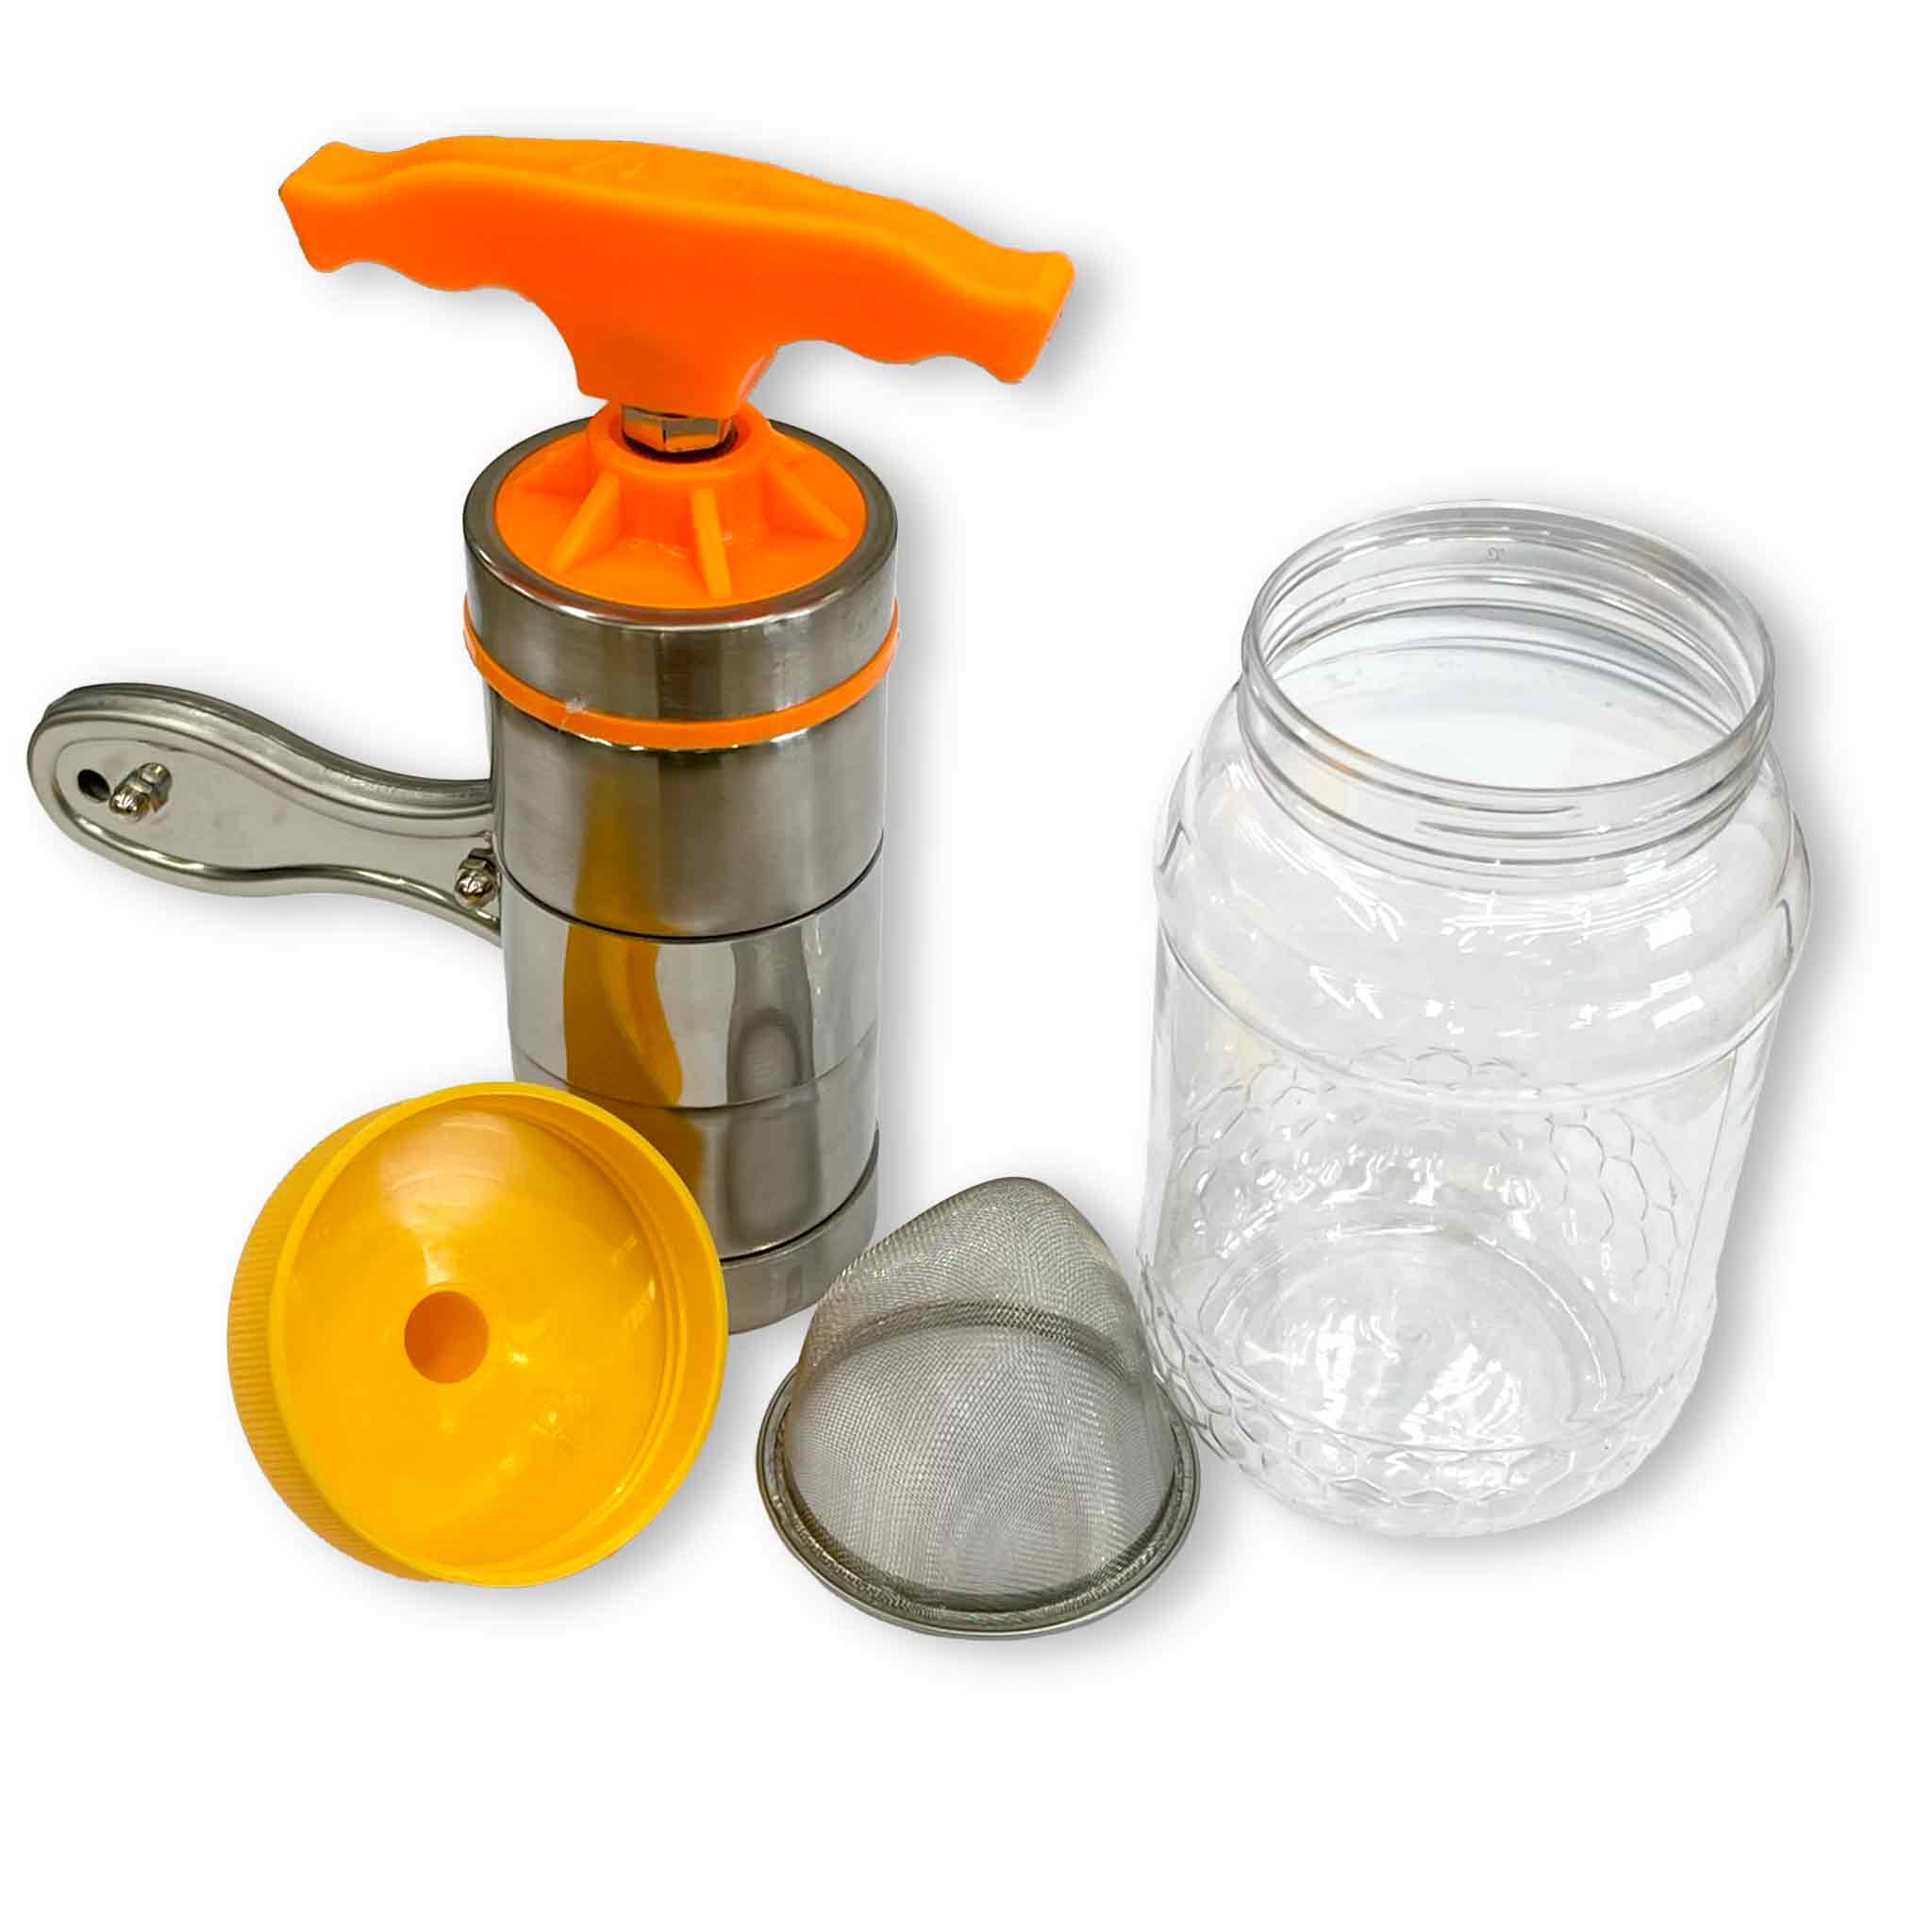 Small Hand Held Honey and Wax/Fruit Juicer Press -  collection by Buzzbee Beekeeping Supplies